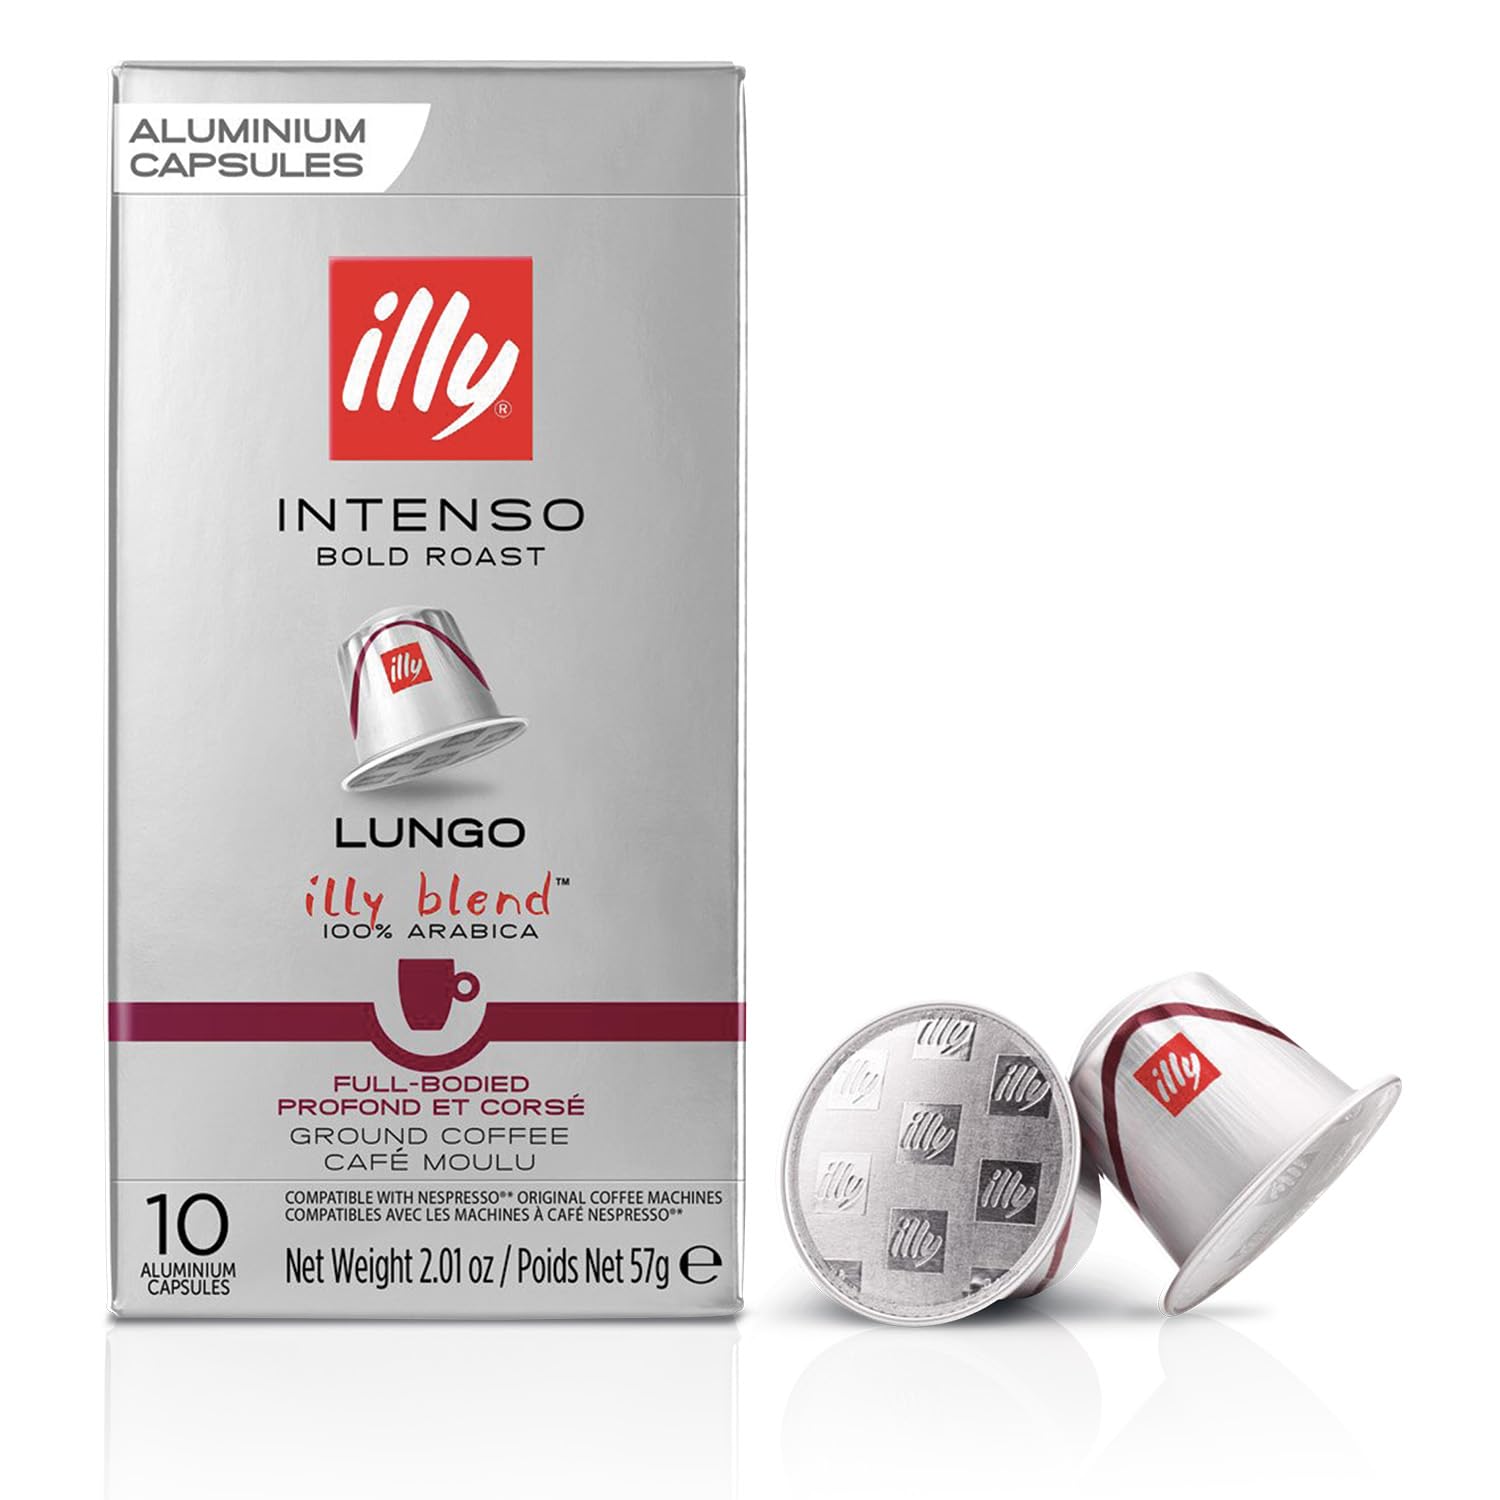 Illy Espresso Compatible Capsules - Single-Serve Coffee Capsules & Pods - Intenso Lungo Dark Roast - Notes Of Cocoa & Dried Fruit Coffee Pods - For Nespresso Coffee Machines – 10 Count